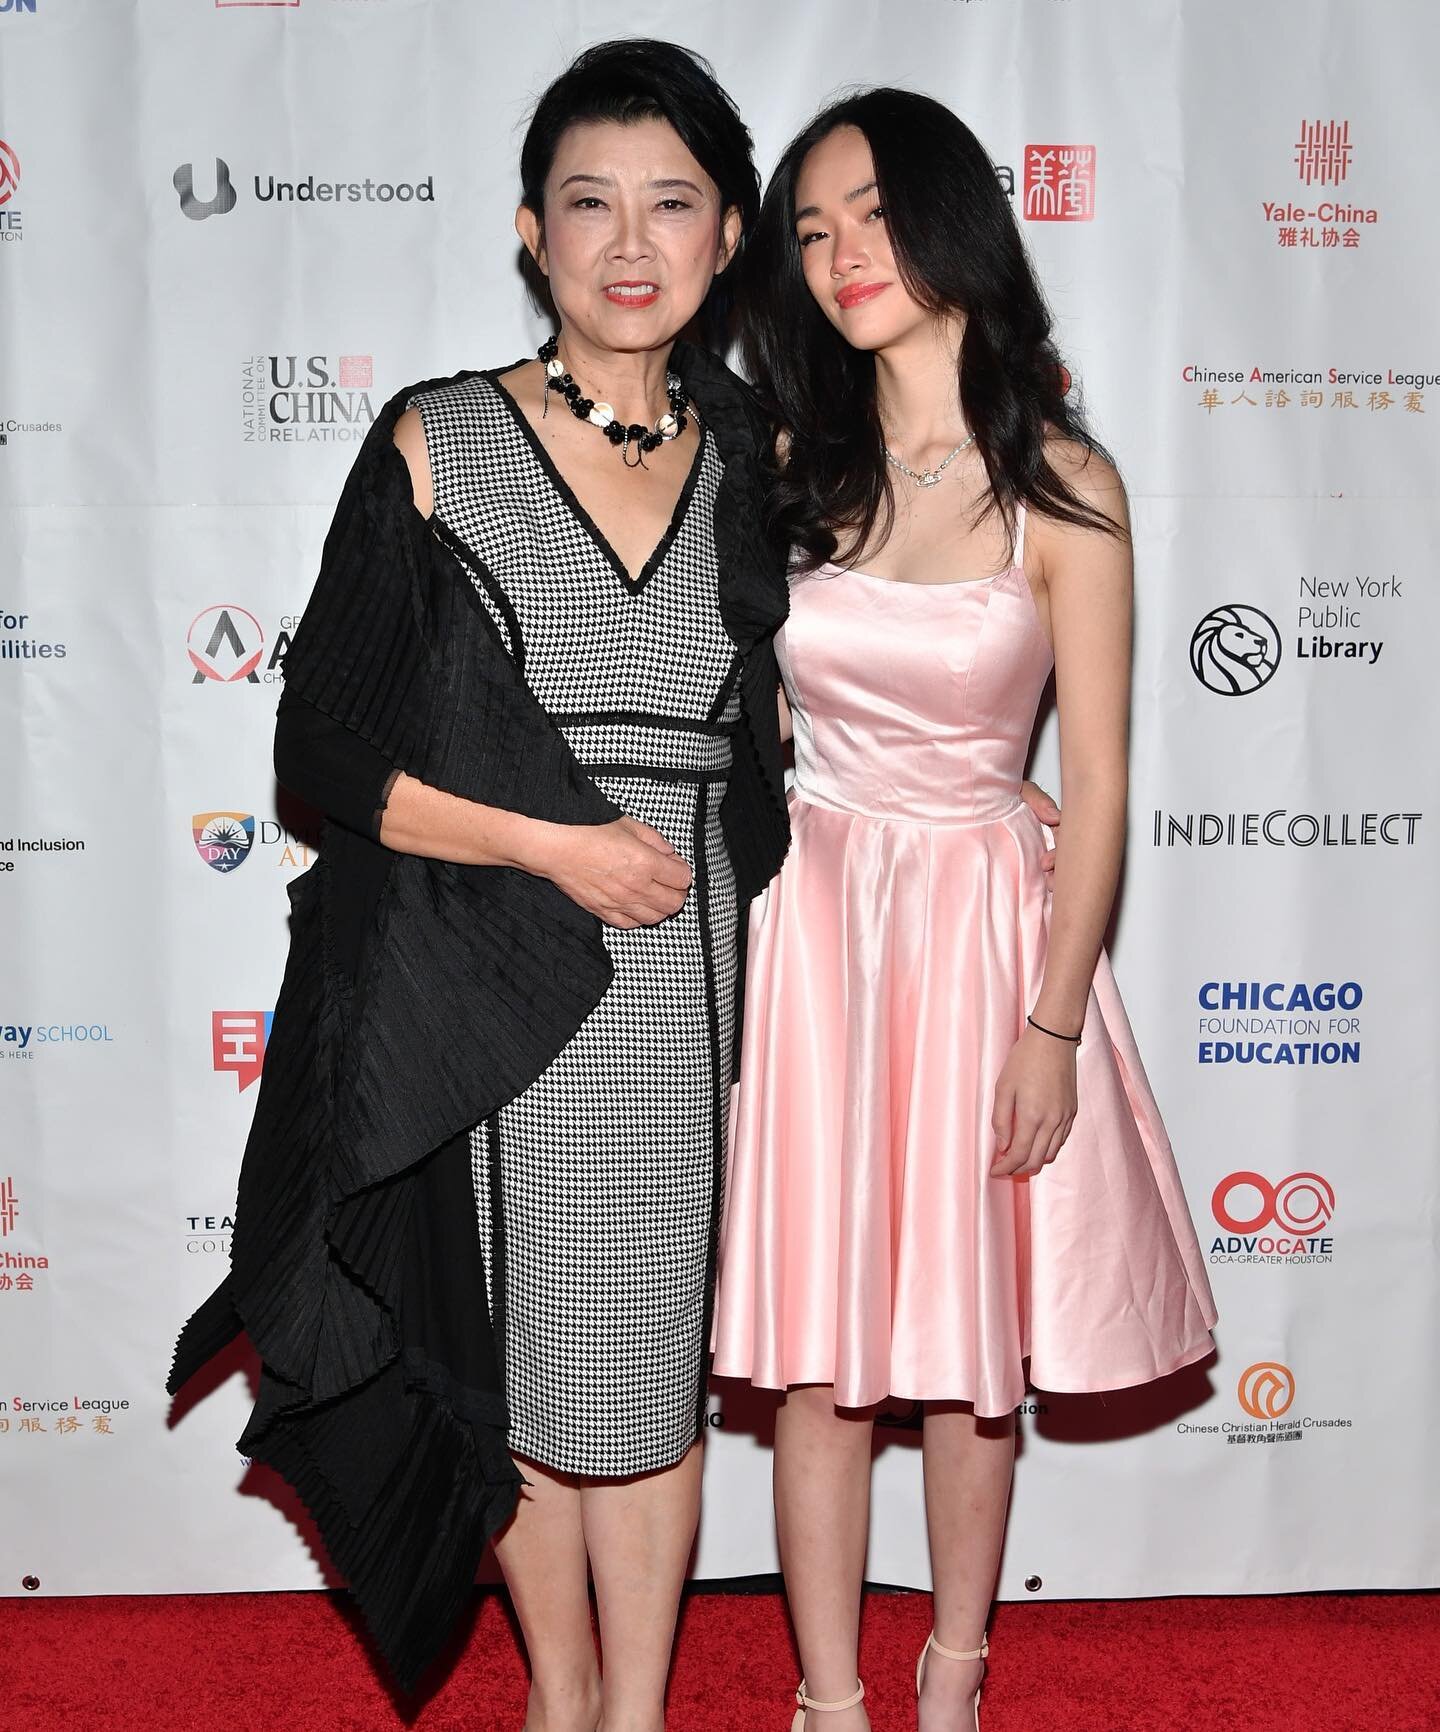 The stunning mother-daughter duo. Our writer/Director Ann and her daughter Michelle Hu. #confettimovie